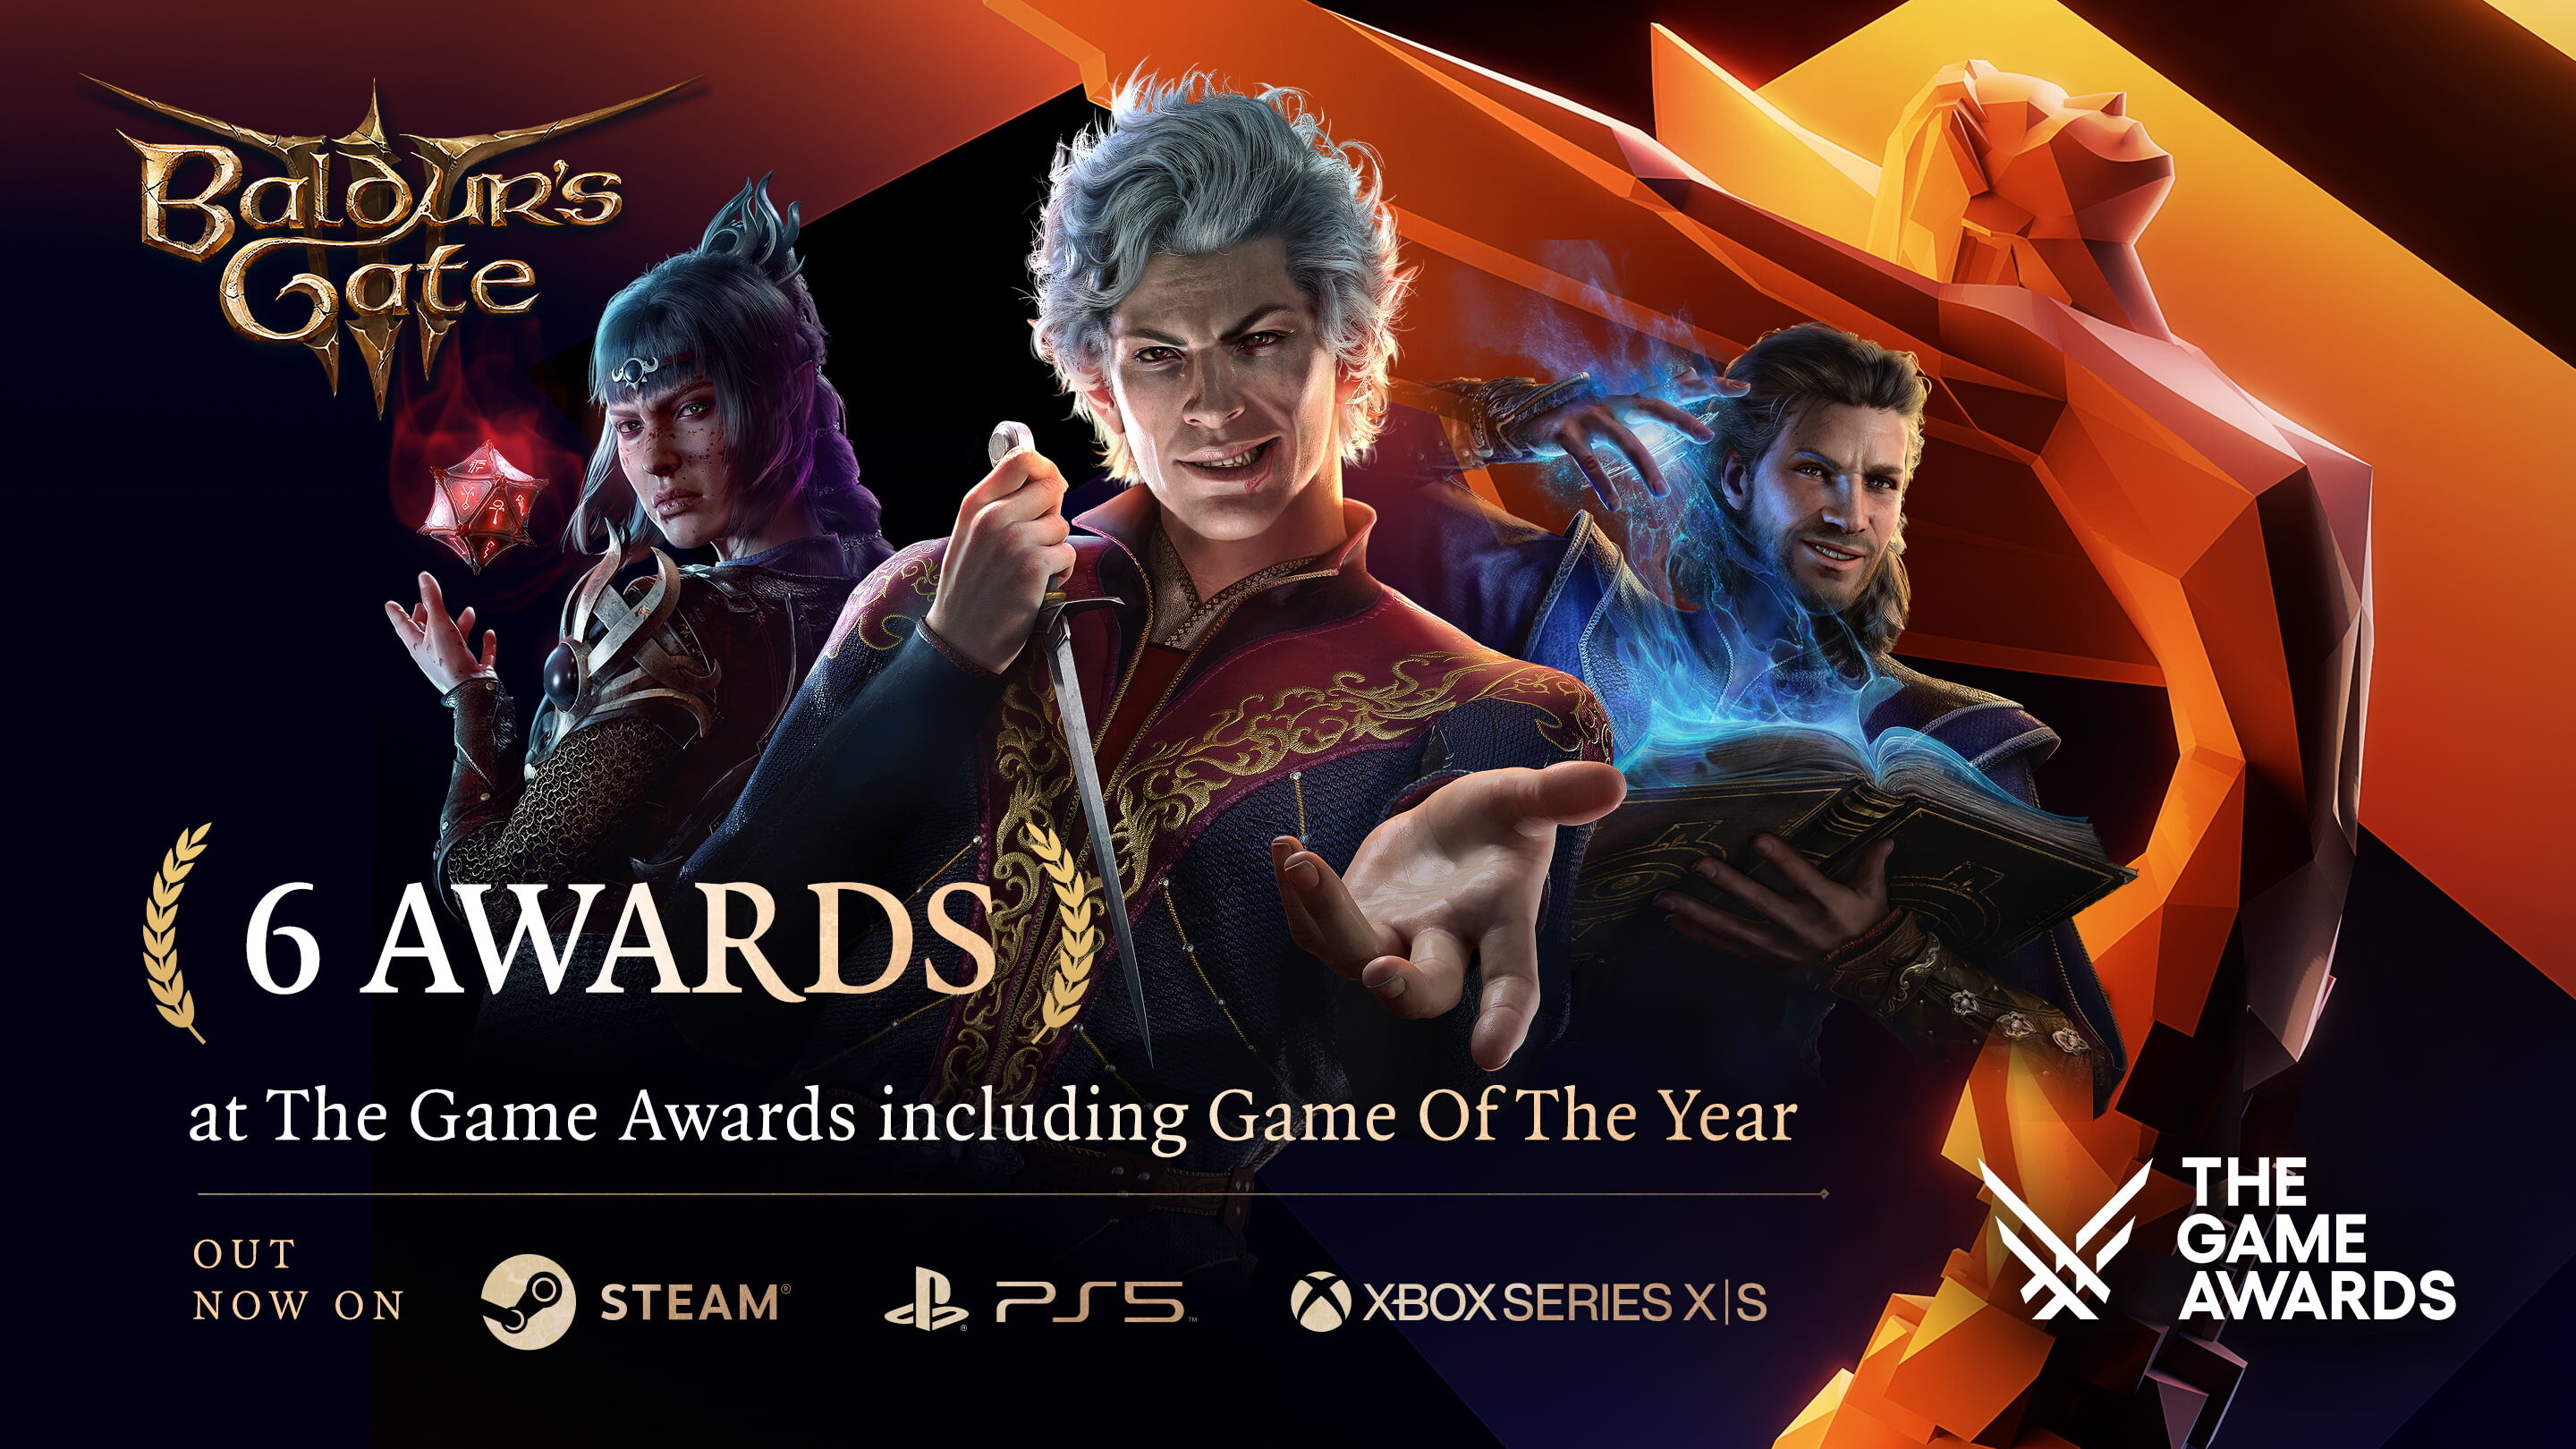 game awards 2023: The Game Awards: Full List of Nominees Out! Find